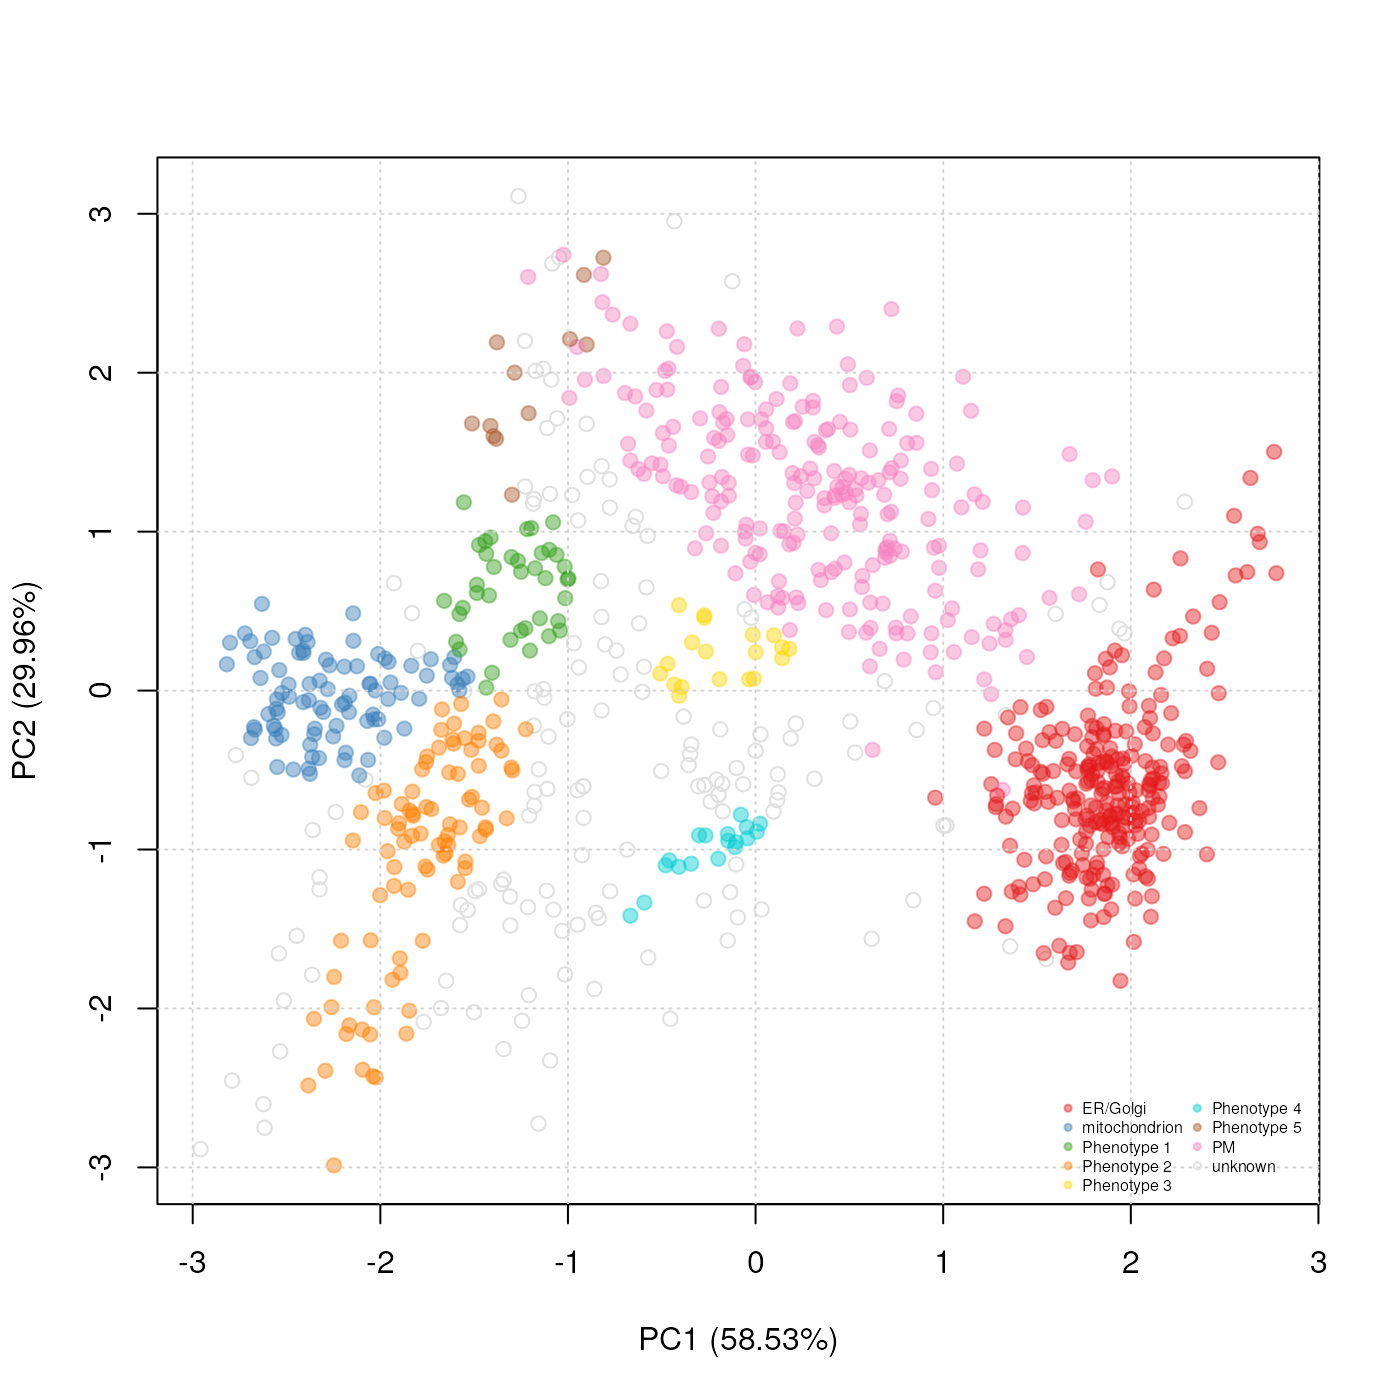 Representation of the phenoDisco prediction and cluster discovery results.